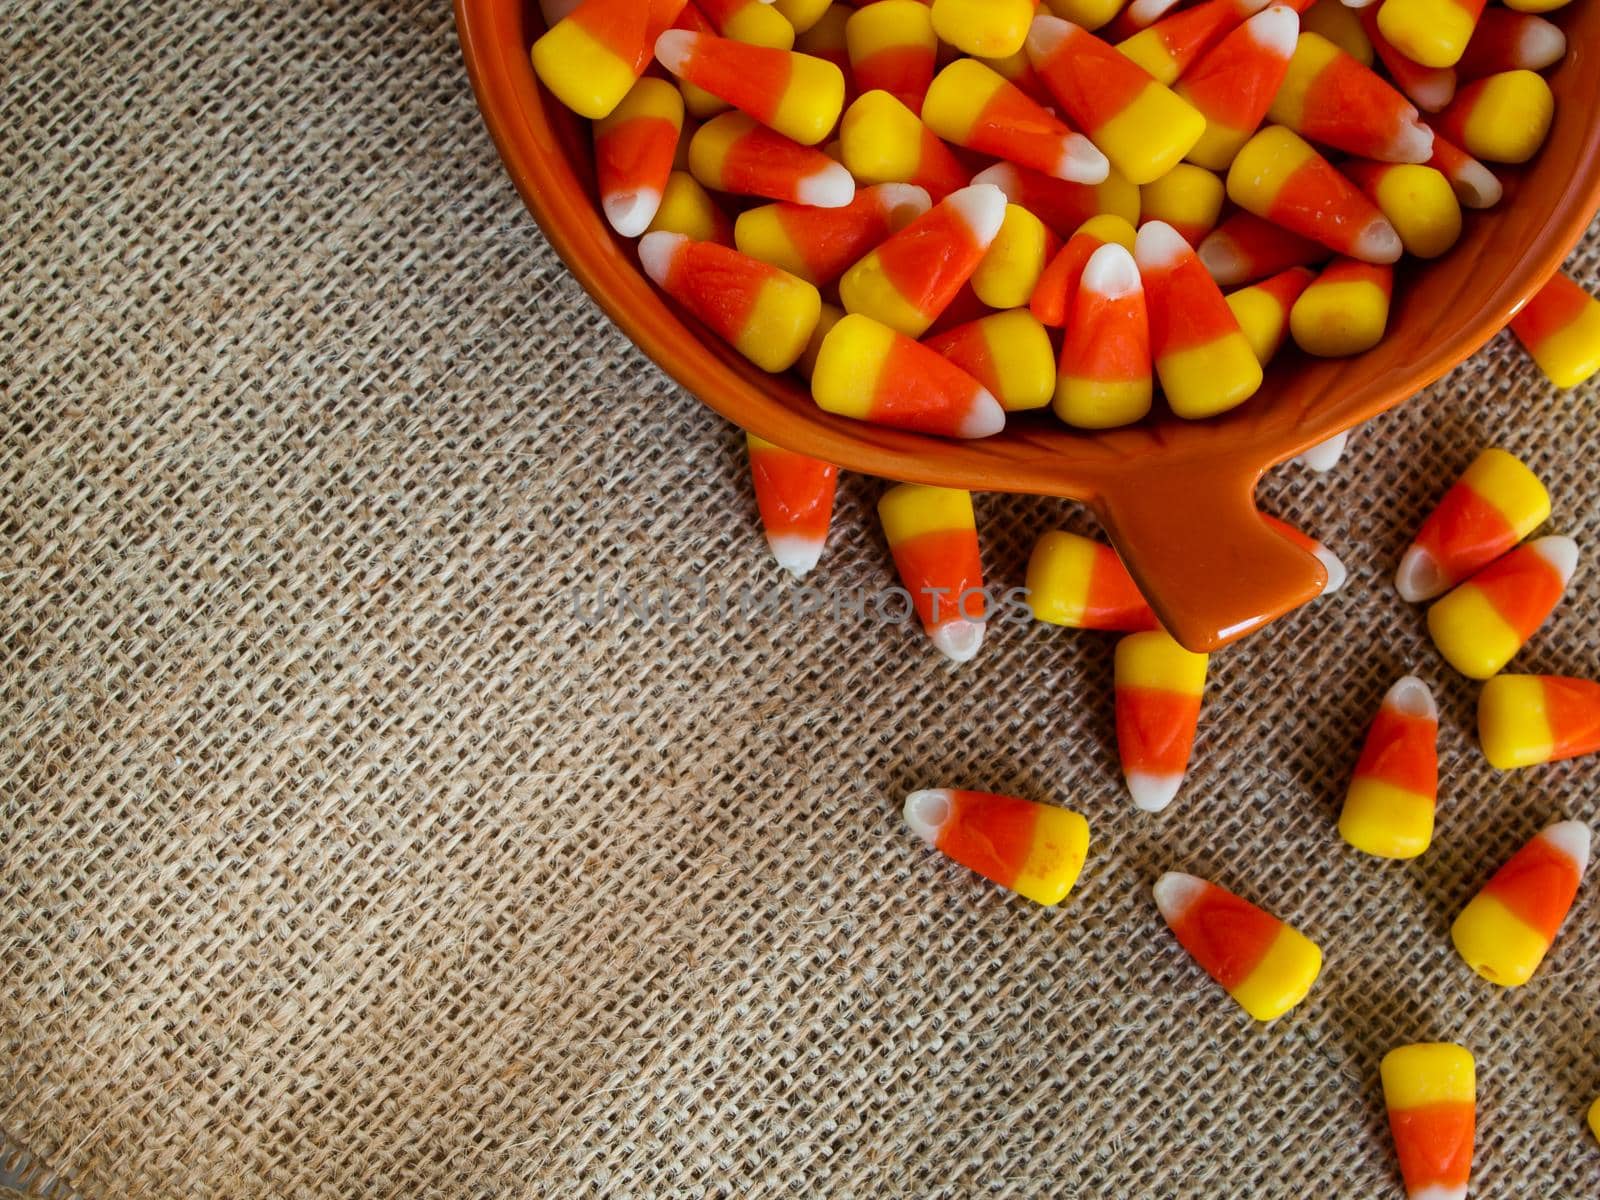 Traditional Halloween candies candy corn in orange bowl.